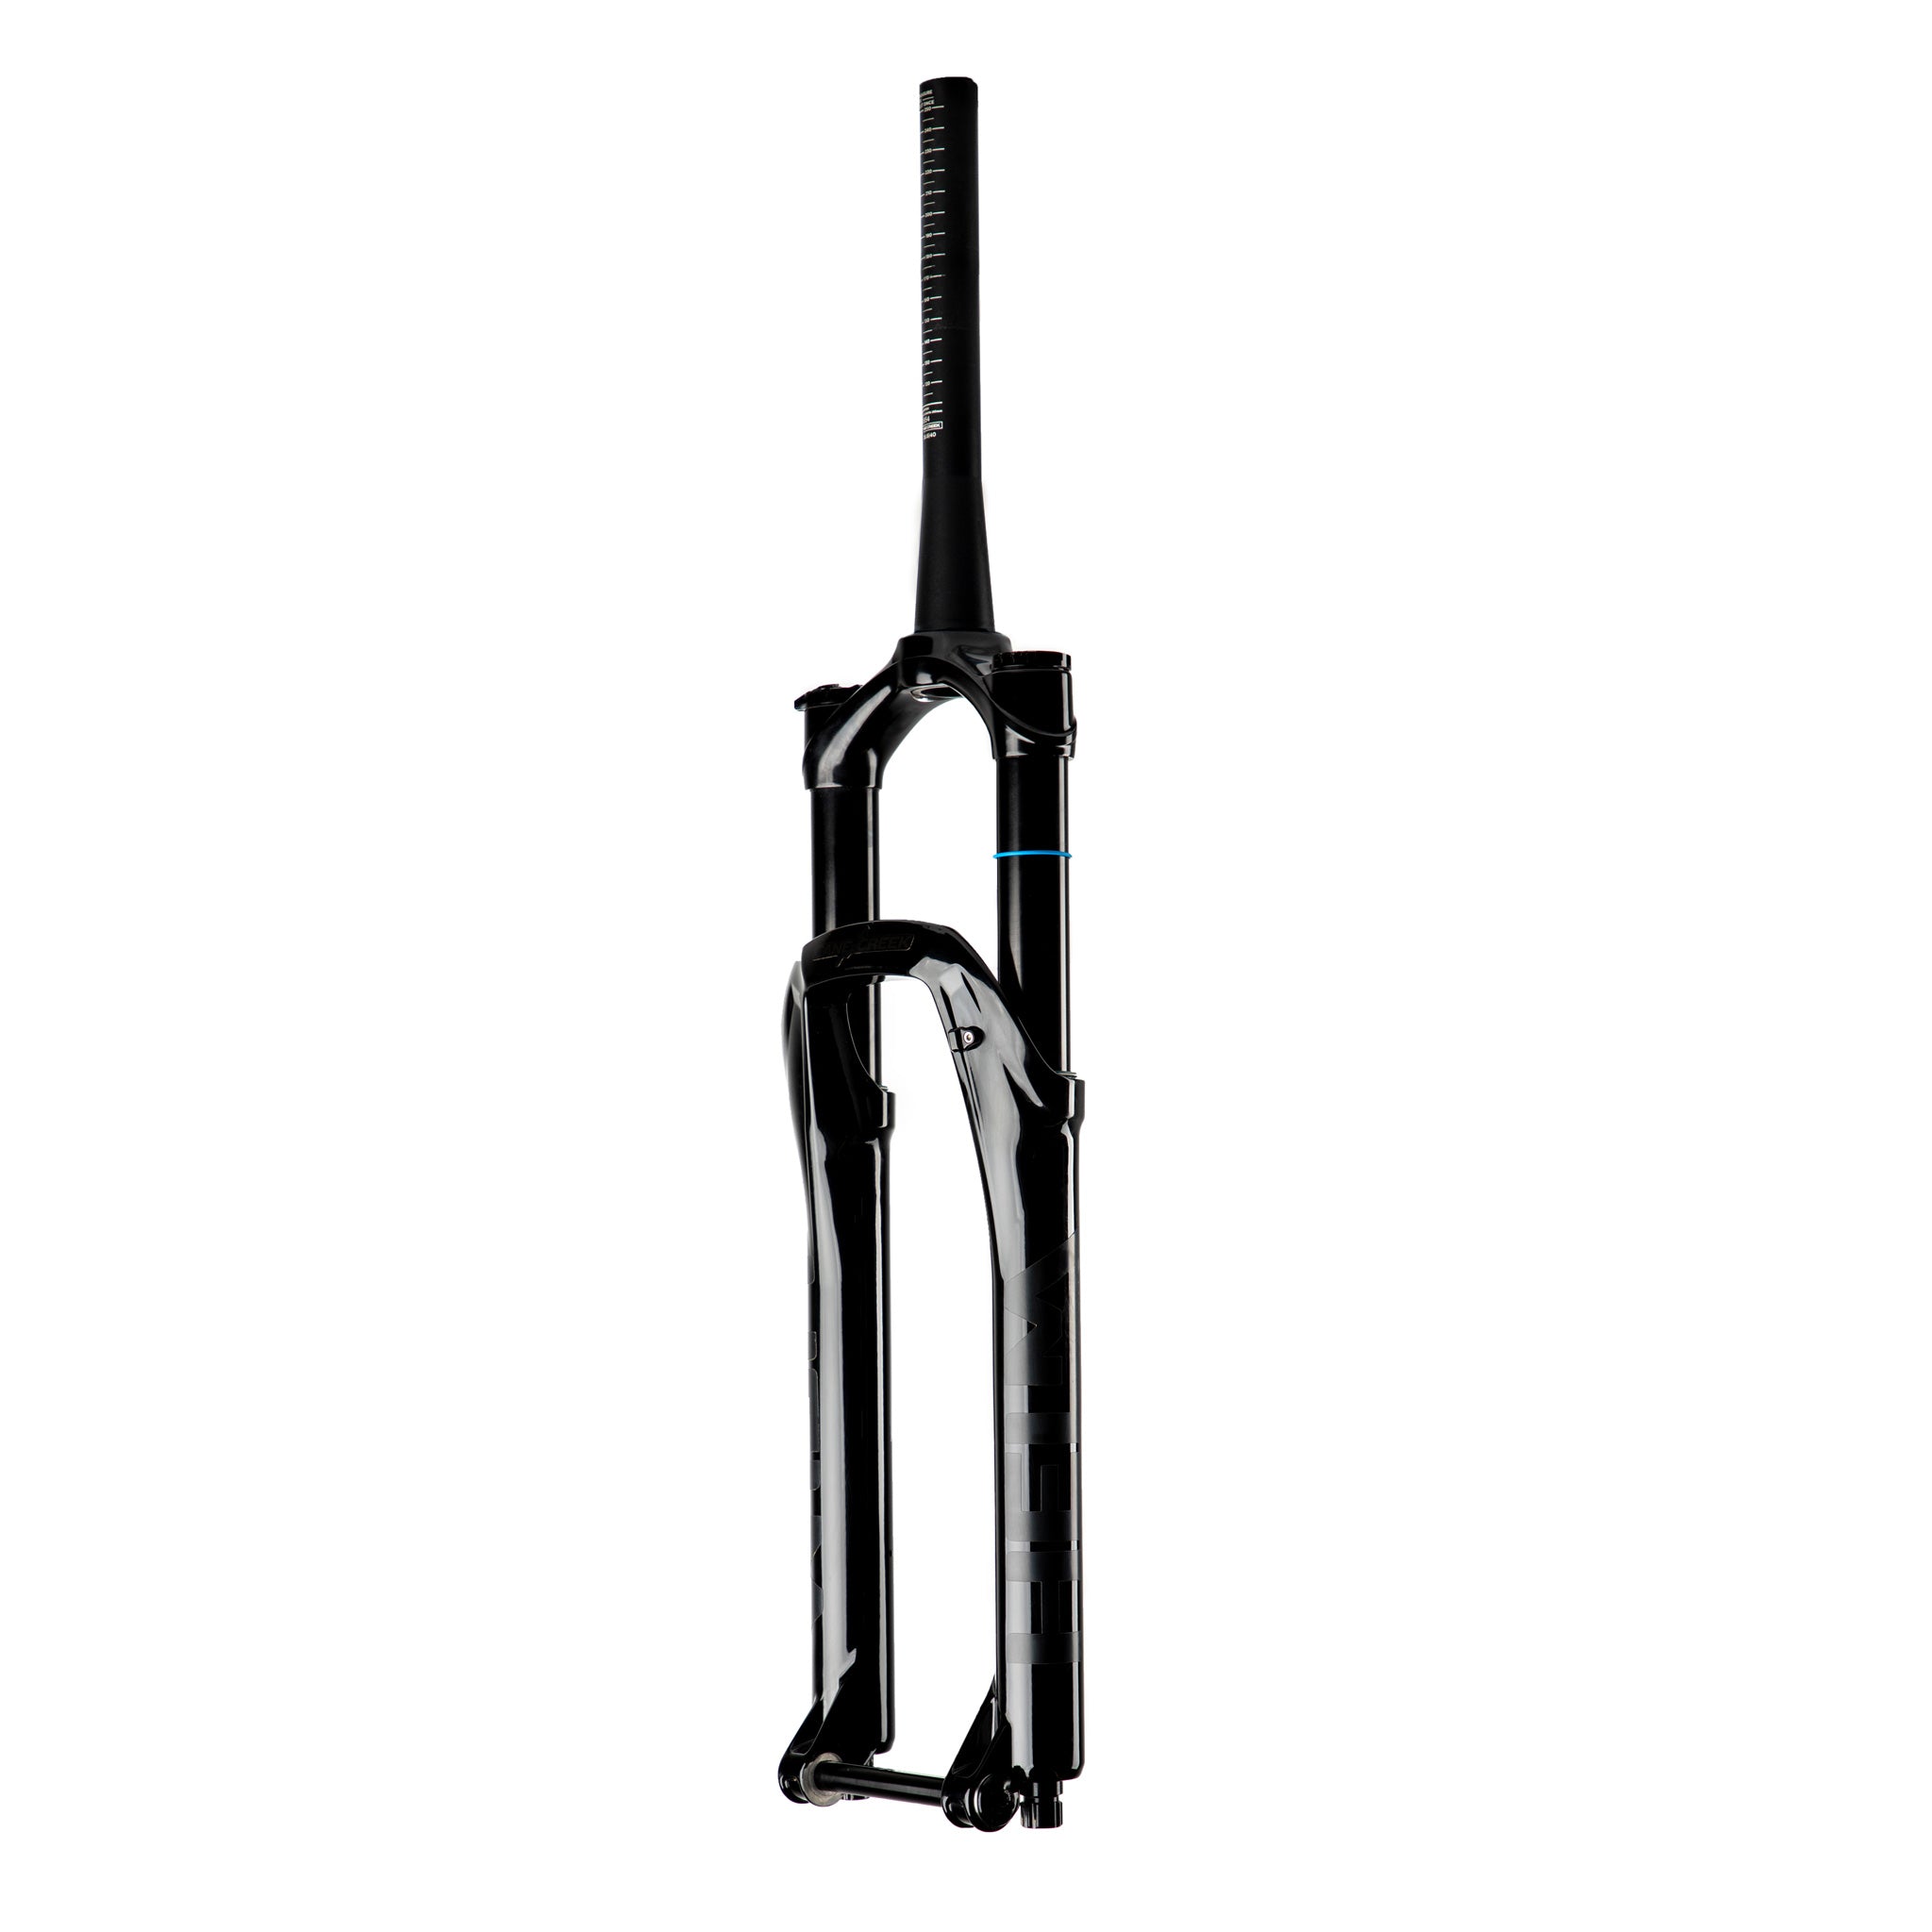 Cane Creek Helm MKII Air 29 Suspension Fork - 29" 160 mm 15 x 110 mm 44 mm Offset Gloss BLK